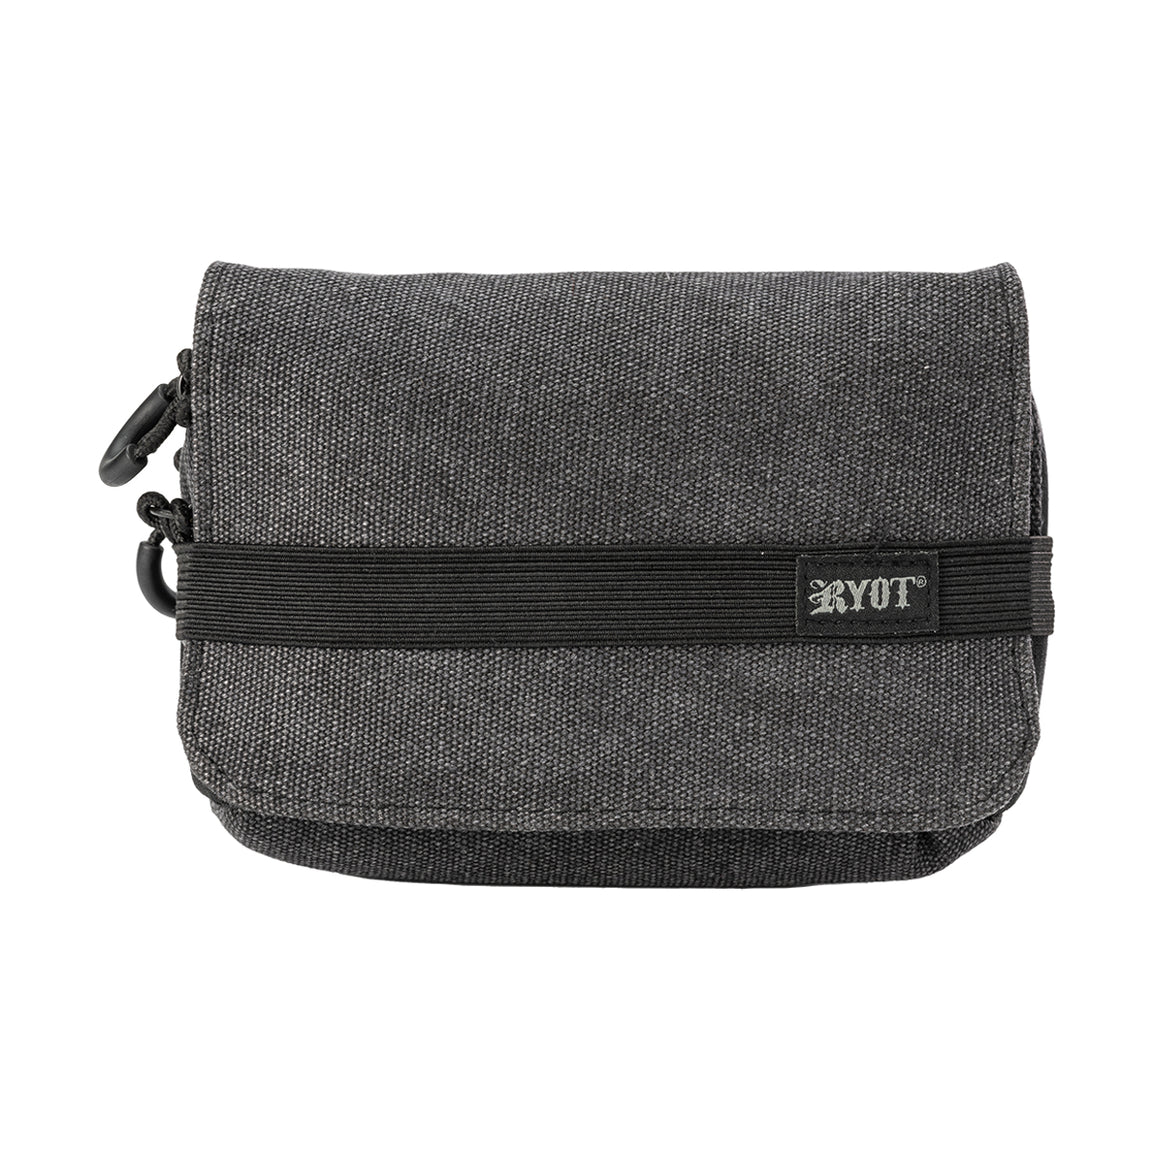 RYOT Mighty smell proof pouch